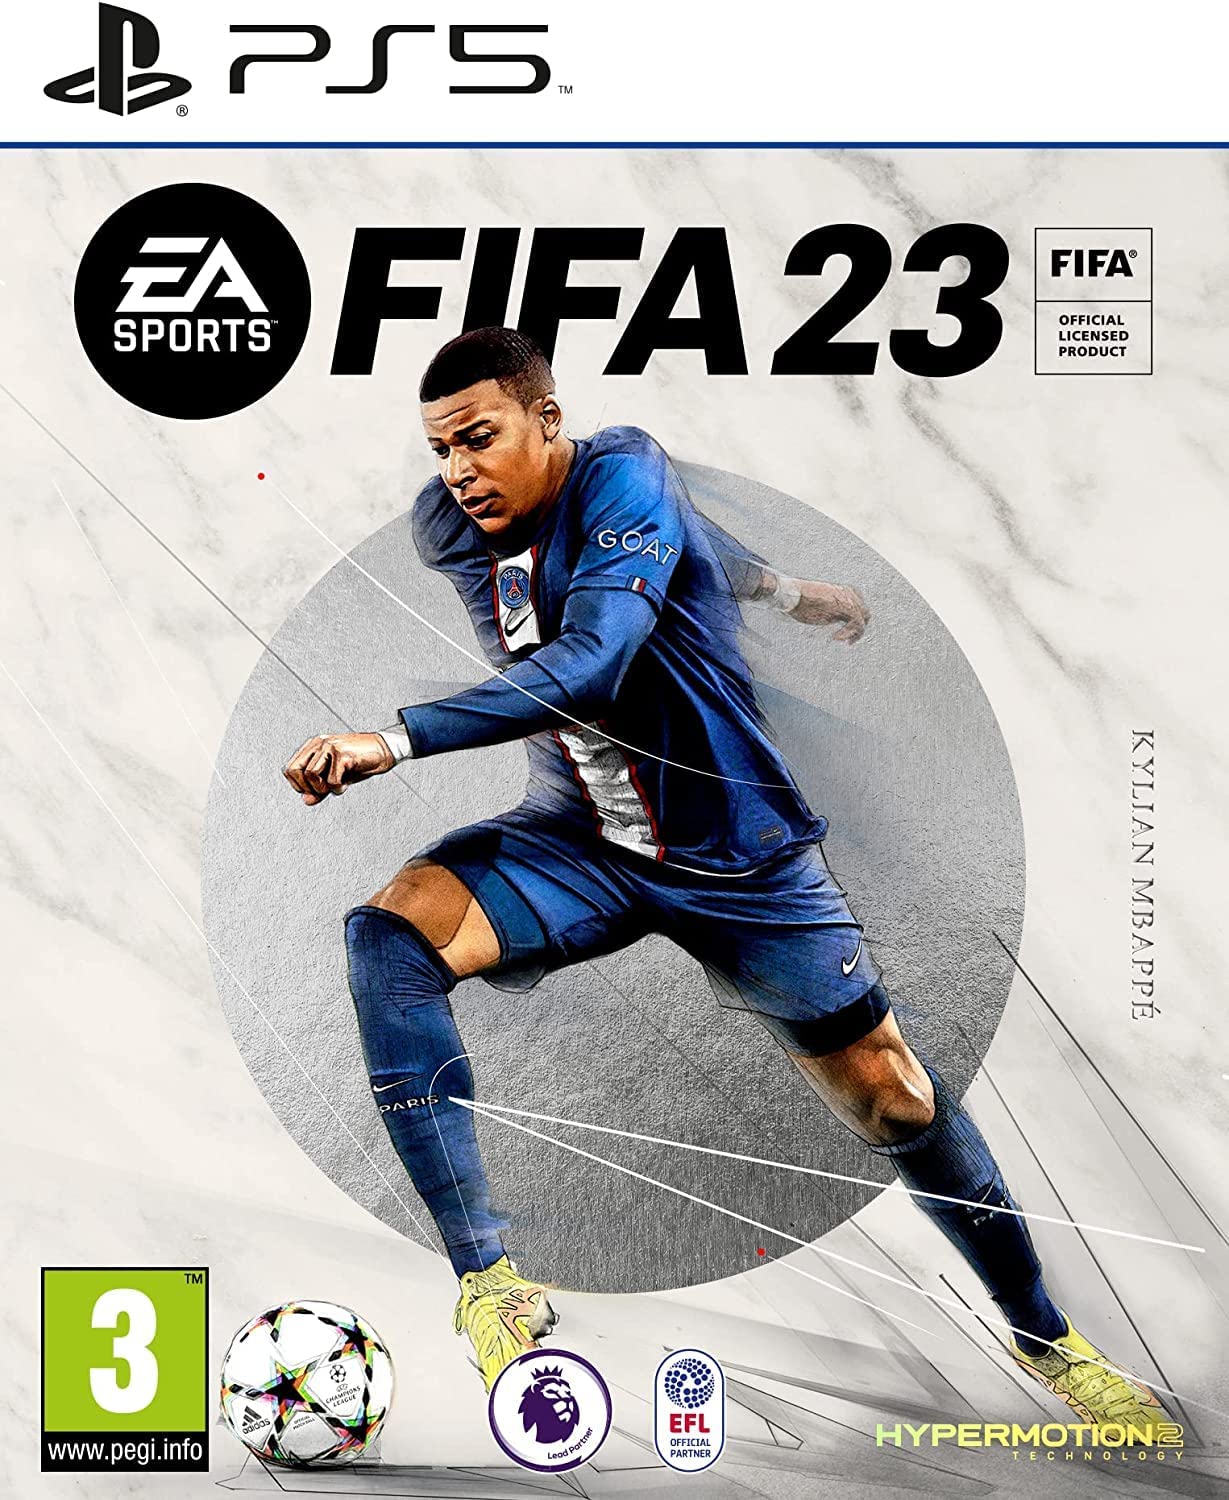 PS5 Game - FIFA 23 Game for Sony Playstation 5